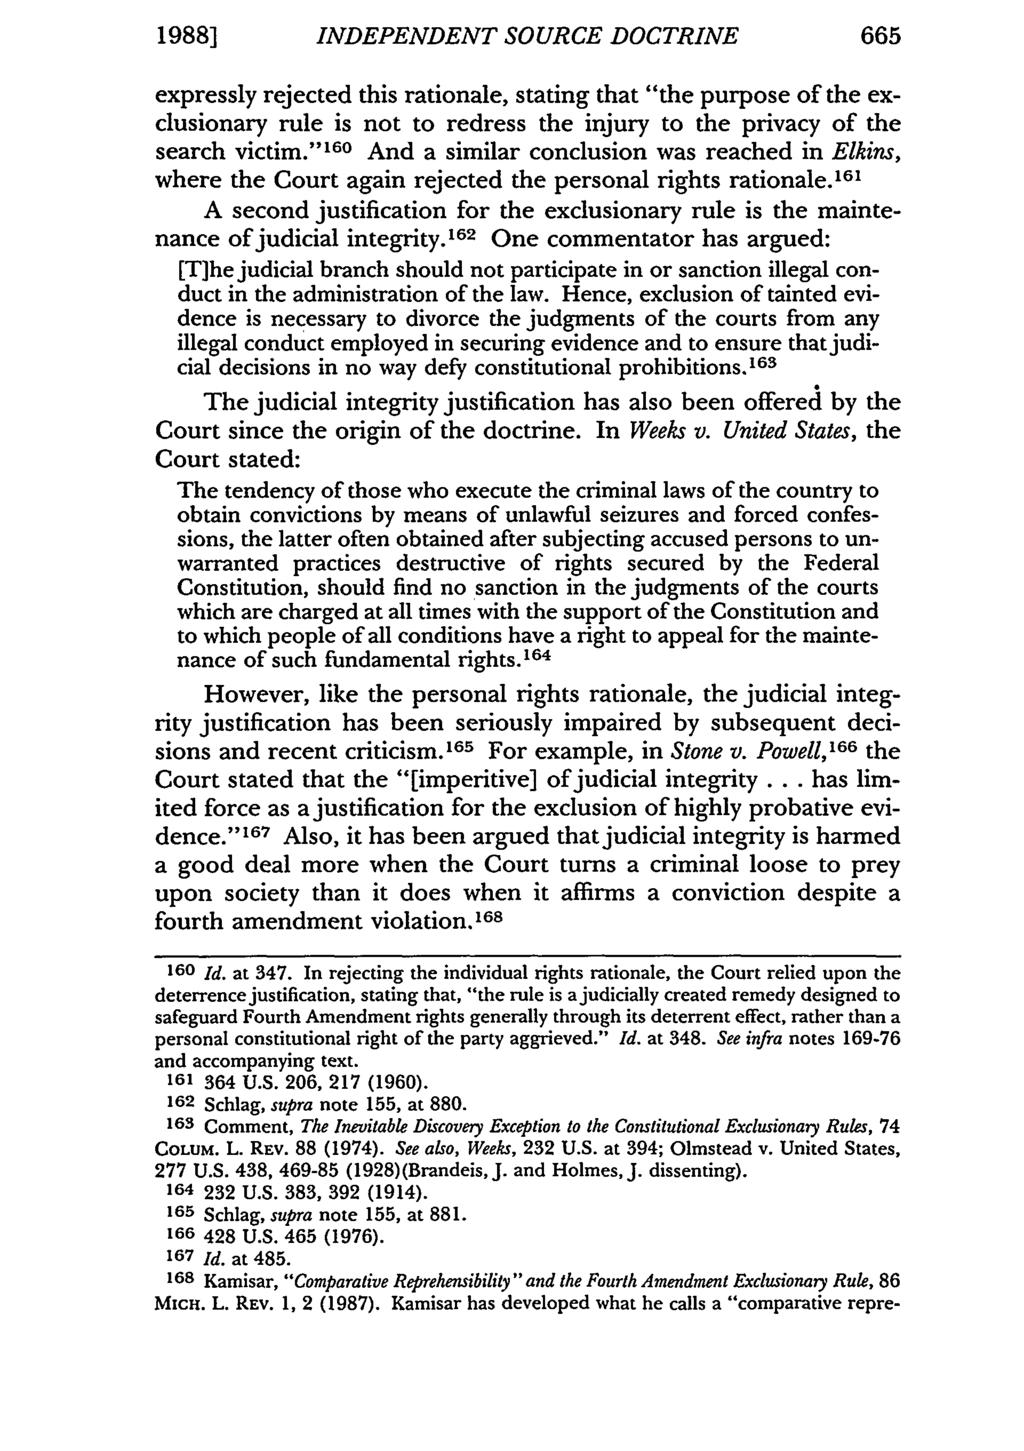 19881 INDEPENDENT SOURCE DOCTRINE 665 expressly rejected this rationale, stating that "the purpose of the exclusionary rule is not to redress the injury to the privacy of the search victim.